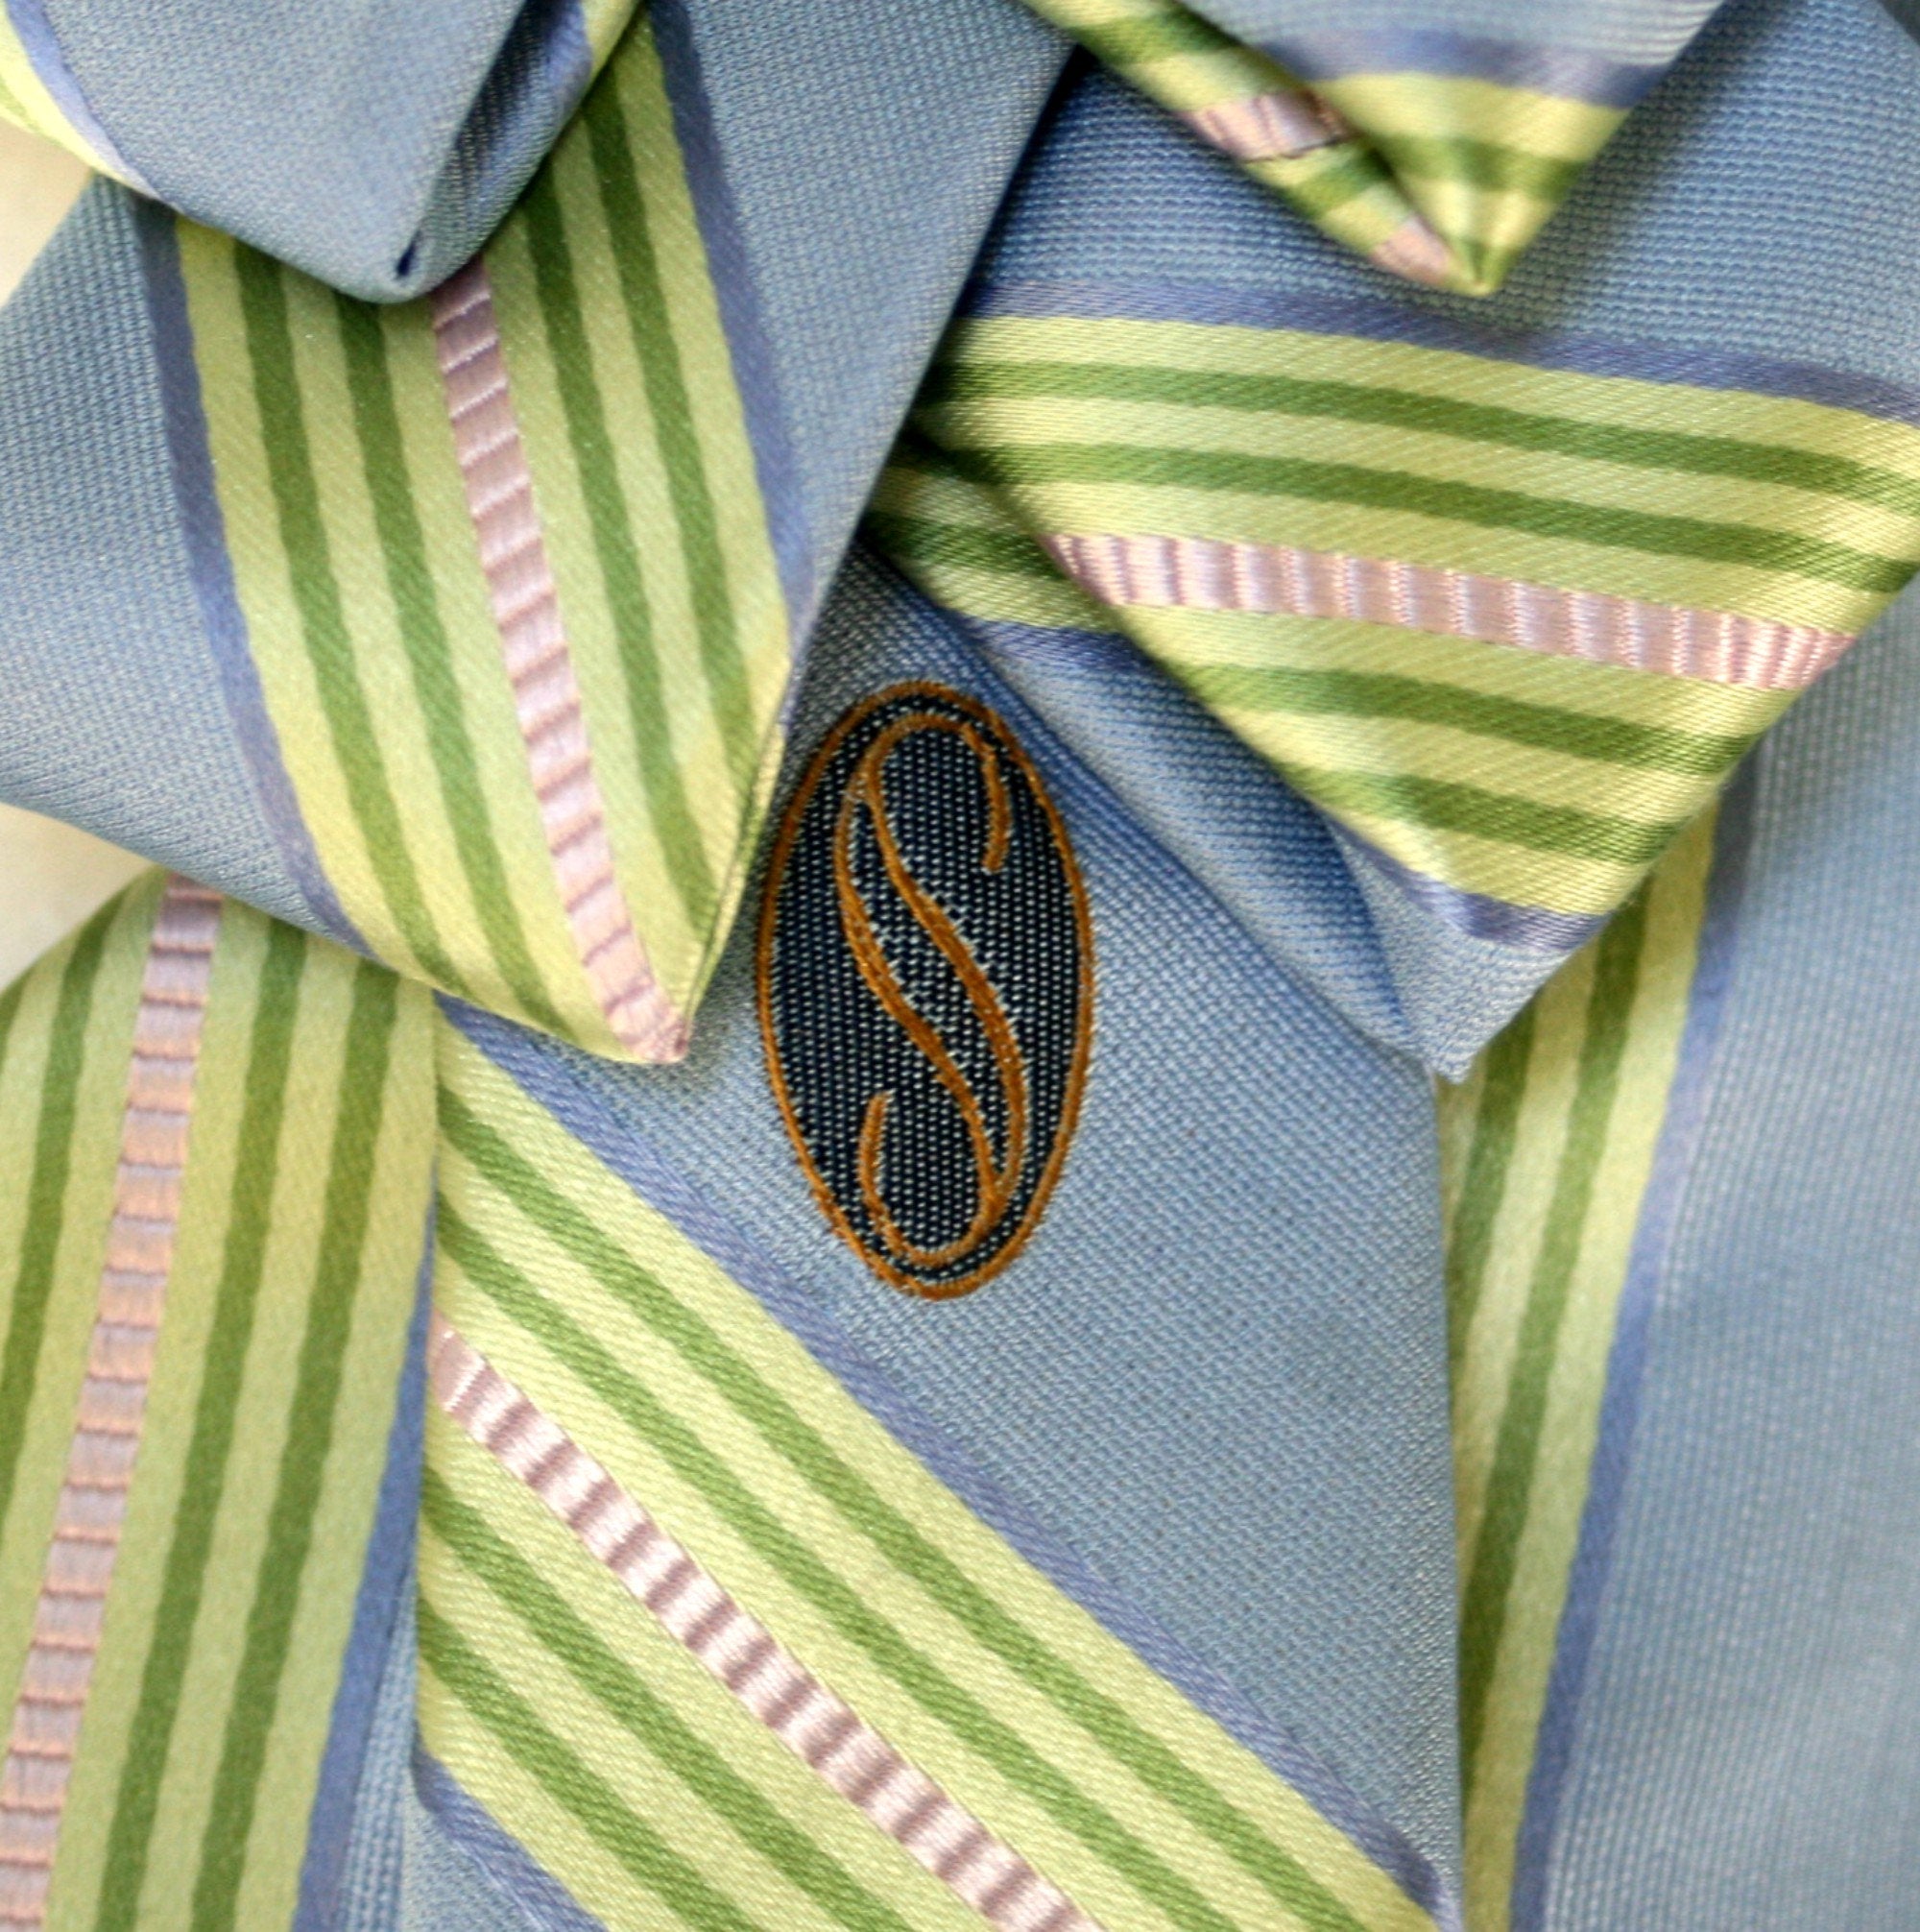 Women's Ascot Scarf In Sky Blue With Cream And Green Stripes.